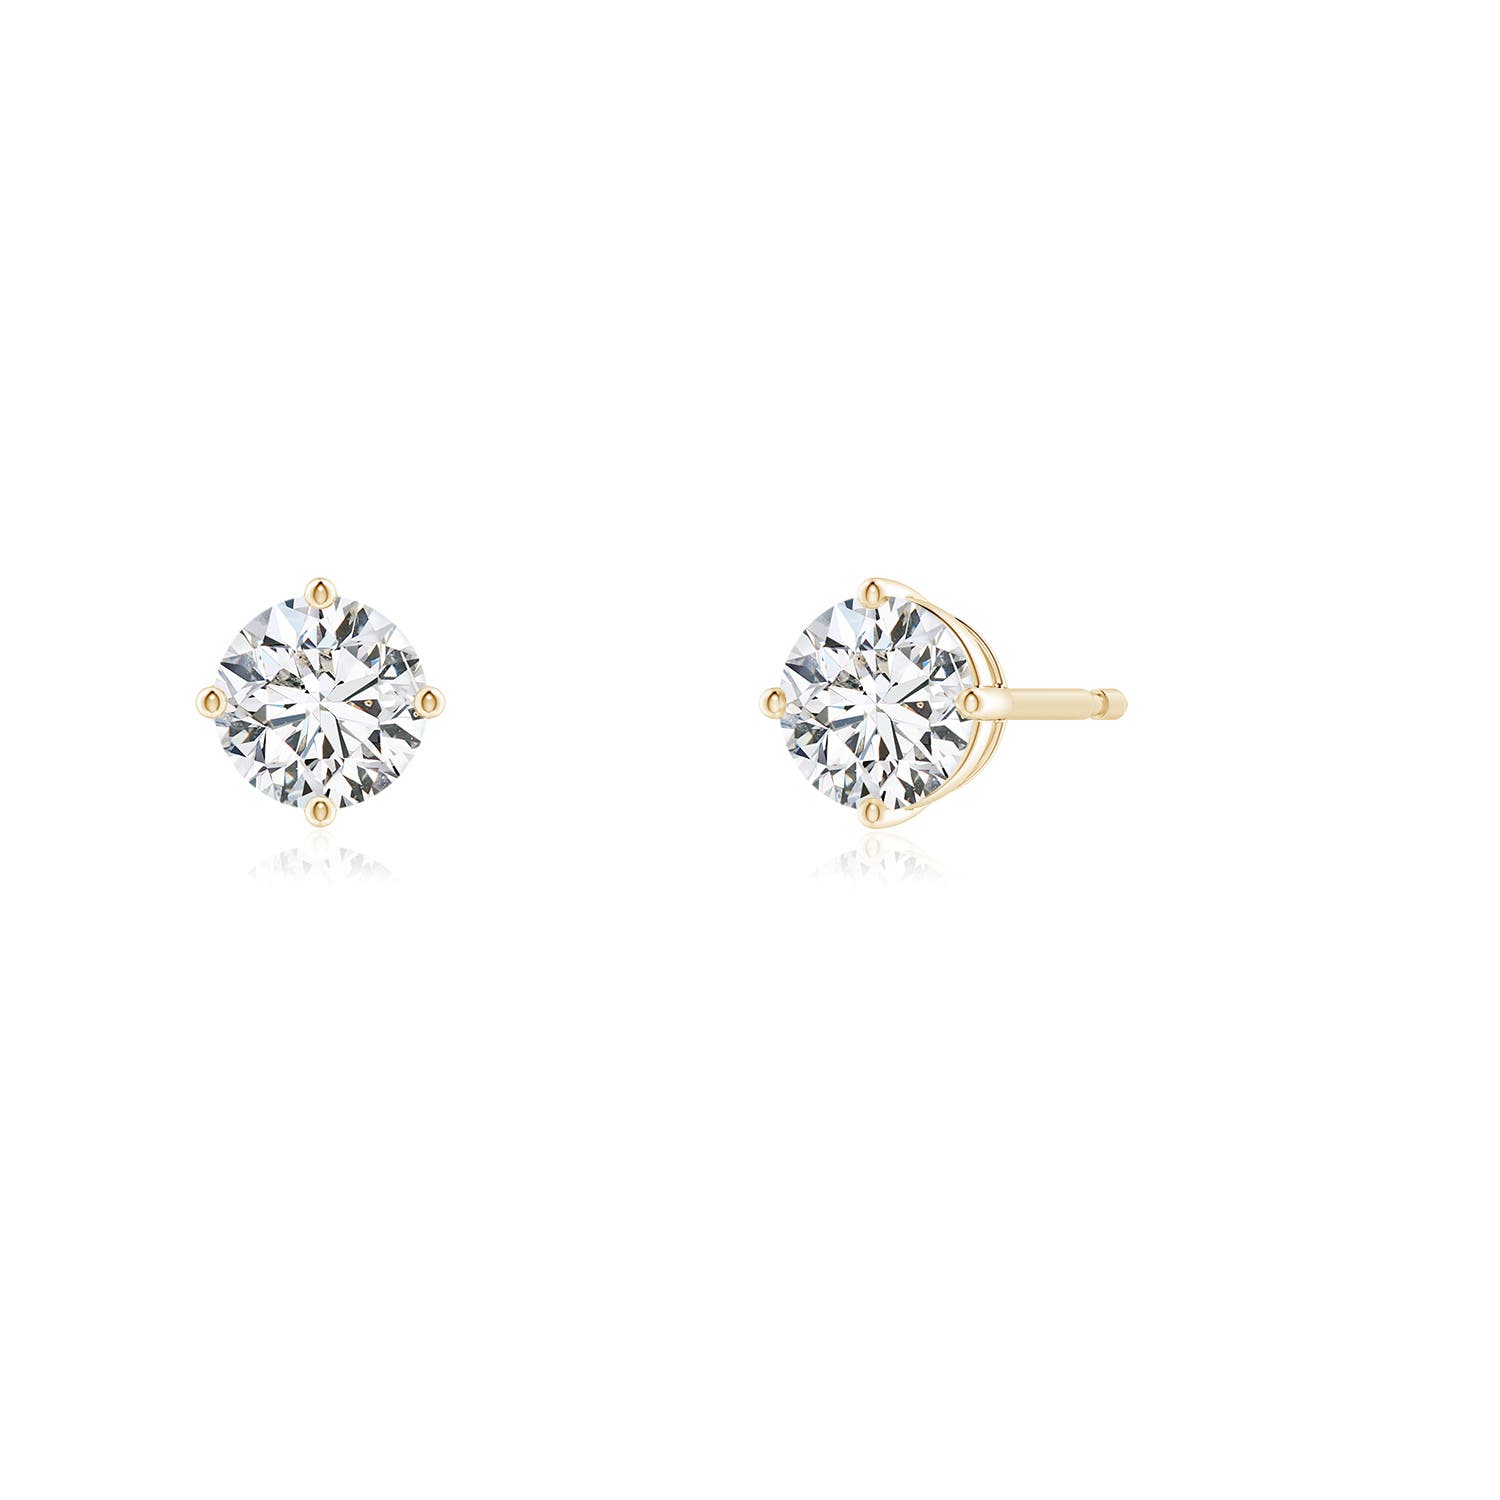 HSI2 / 0.76 CT / 14 KT Yellow Gold